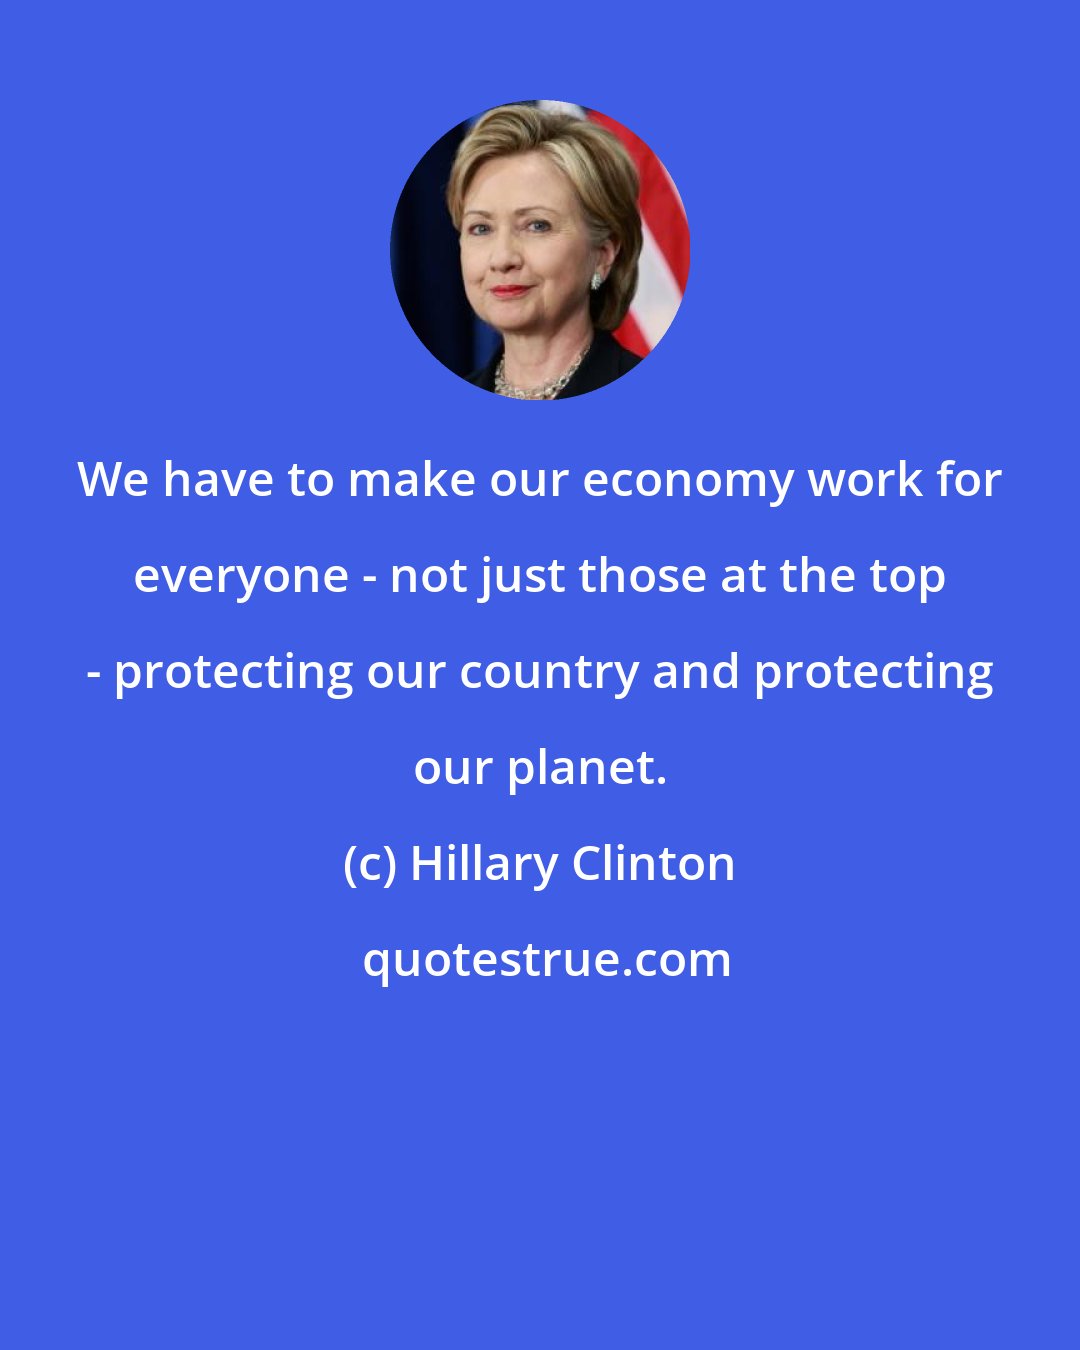 Hillary Clinton: We have to make our economy work for everyone - not just those at the top - protecting our country and protecting our planet.